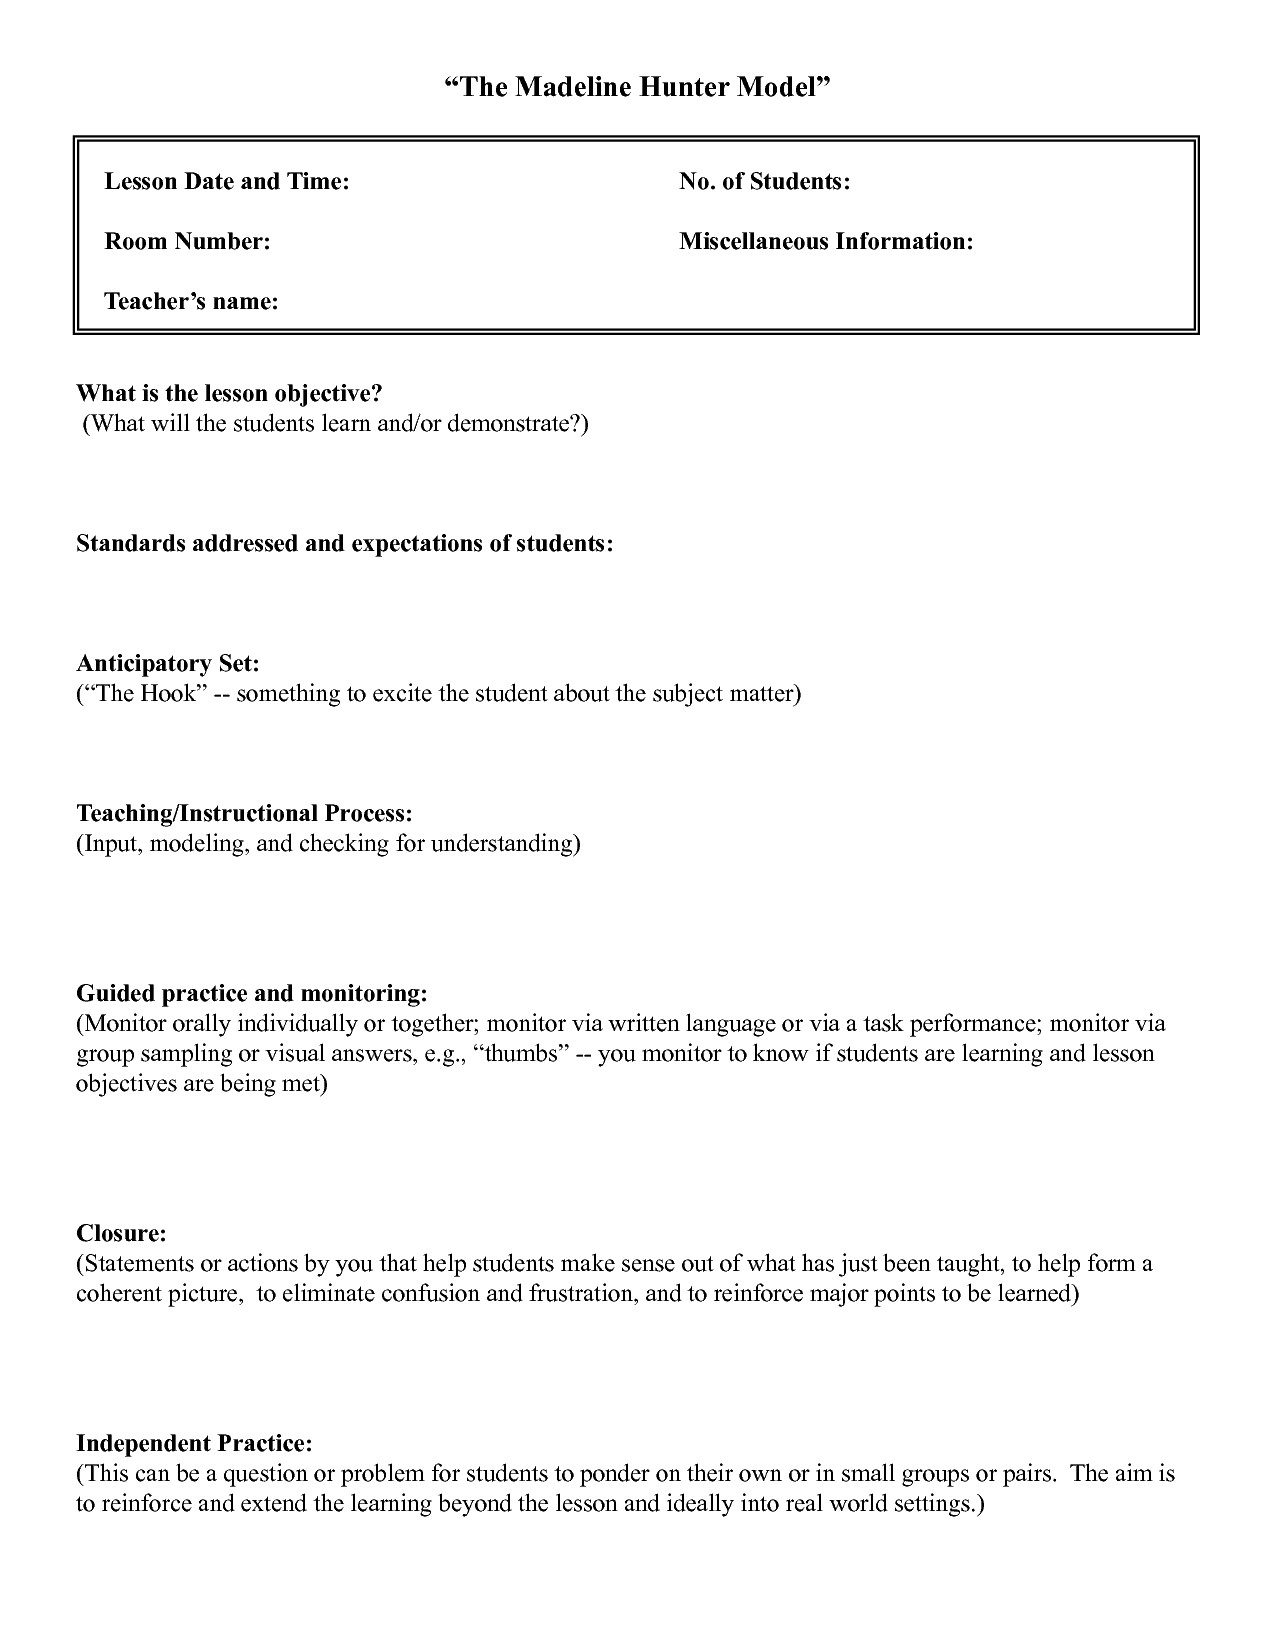 Madeline Hunter Lesson Plan 12 13 Lesson Plan Template for Adults Lascazuelasphilly